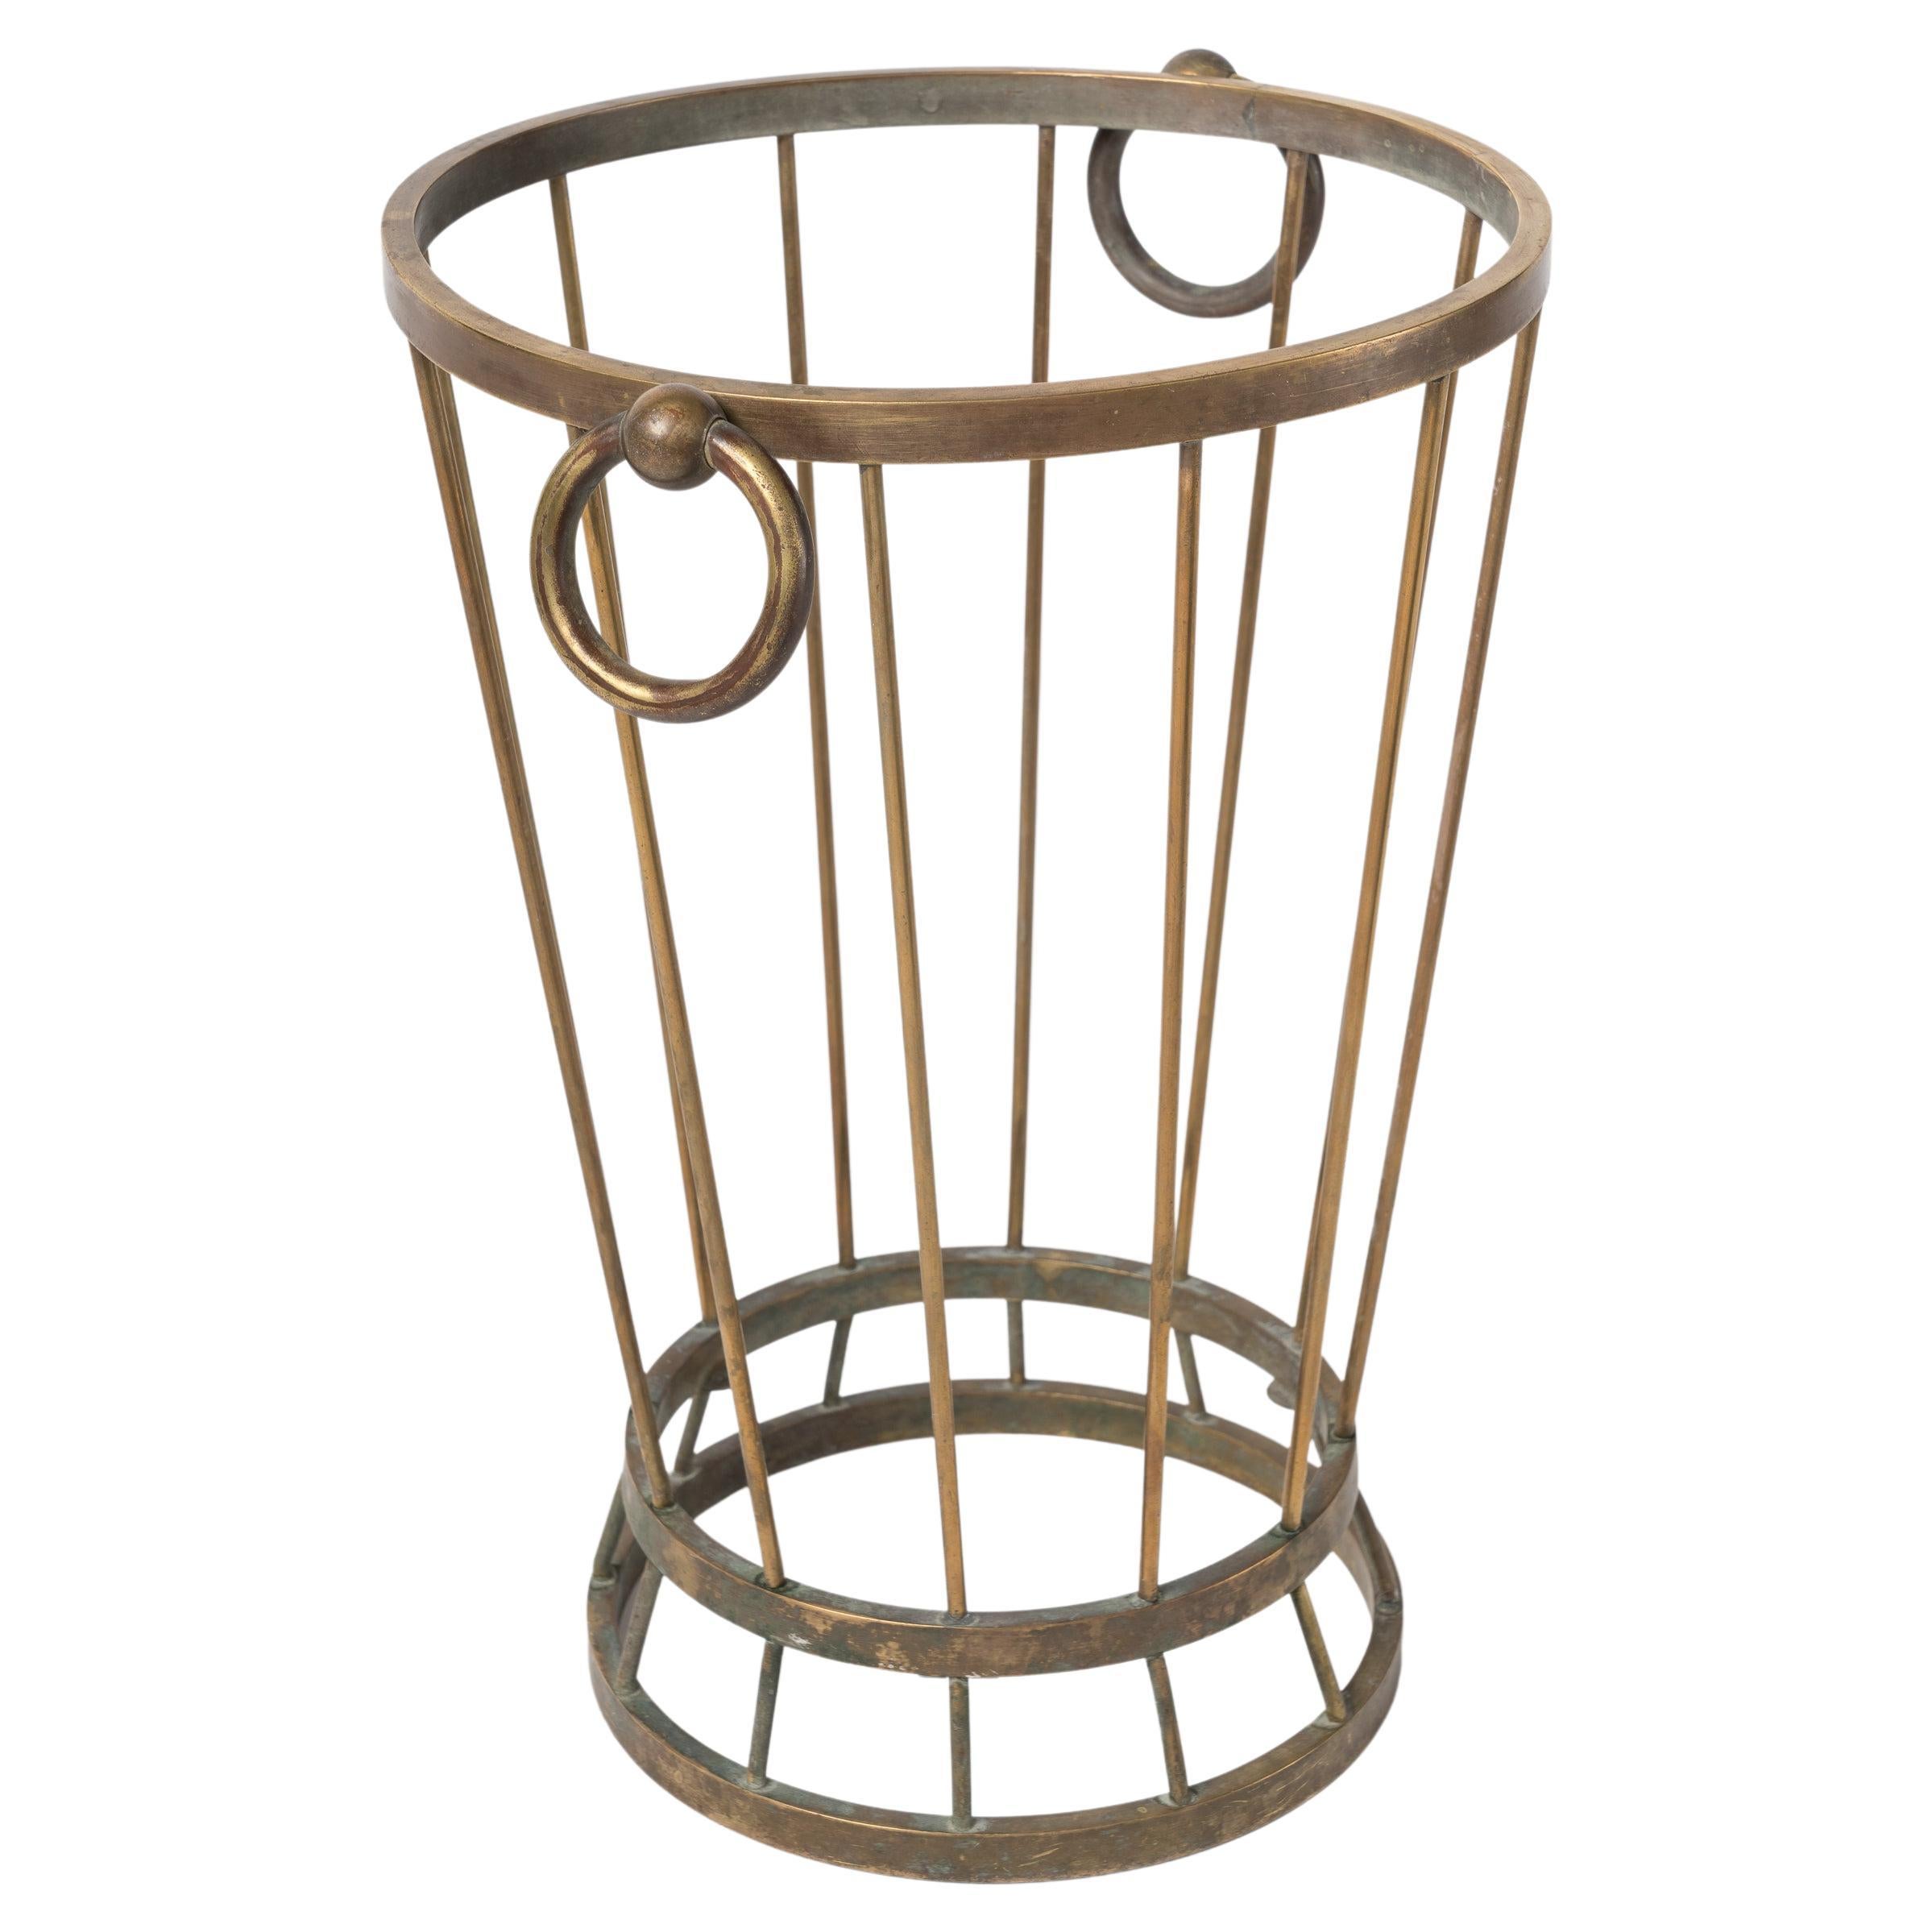 Elegant modernist umbrella stand made of patinated brass. In the style of Royere.
This stand will ship from France and can be returned to either France or to a LIC NY location.
Price does not include shipping nor possible customs duties related